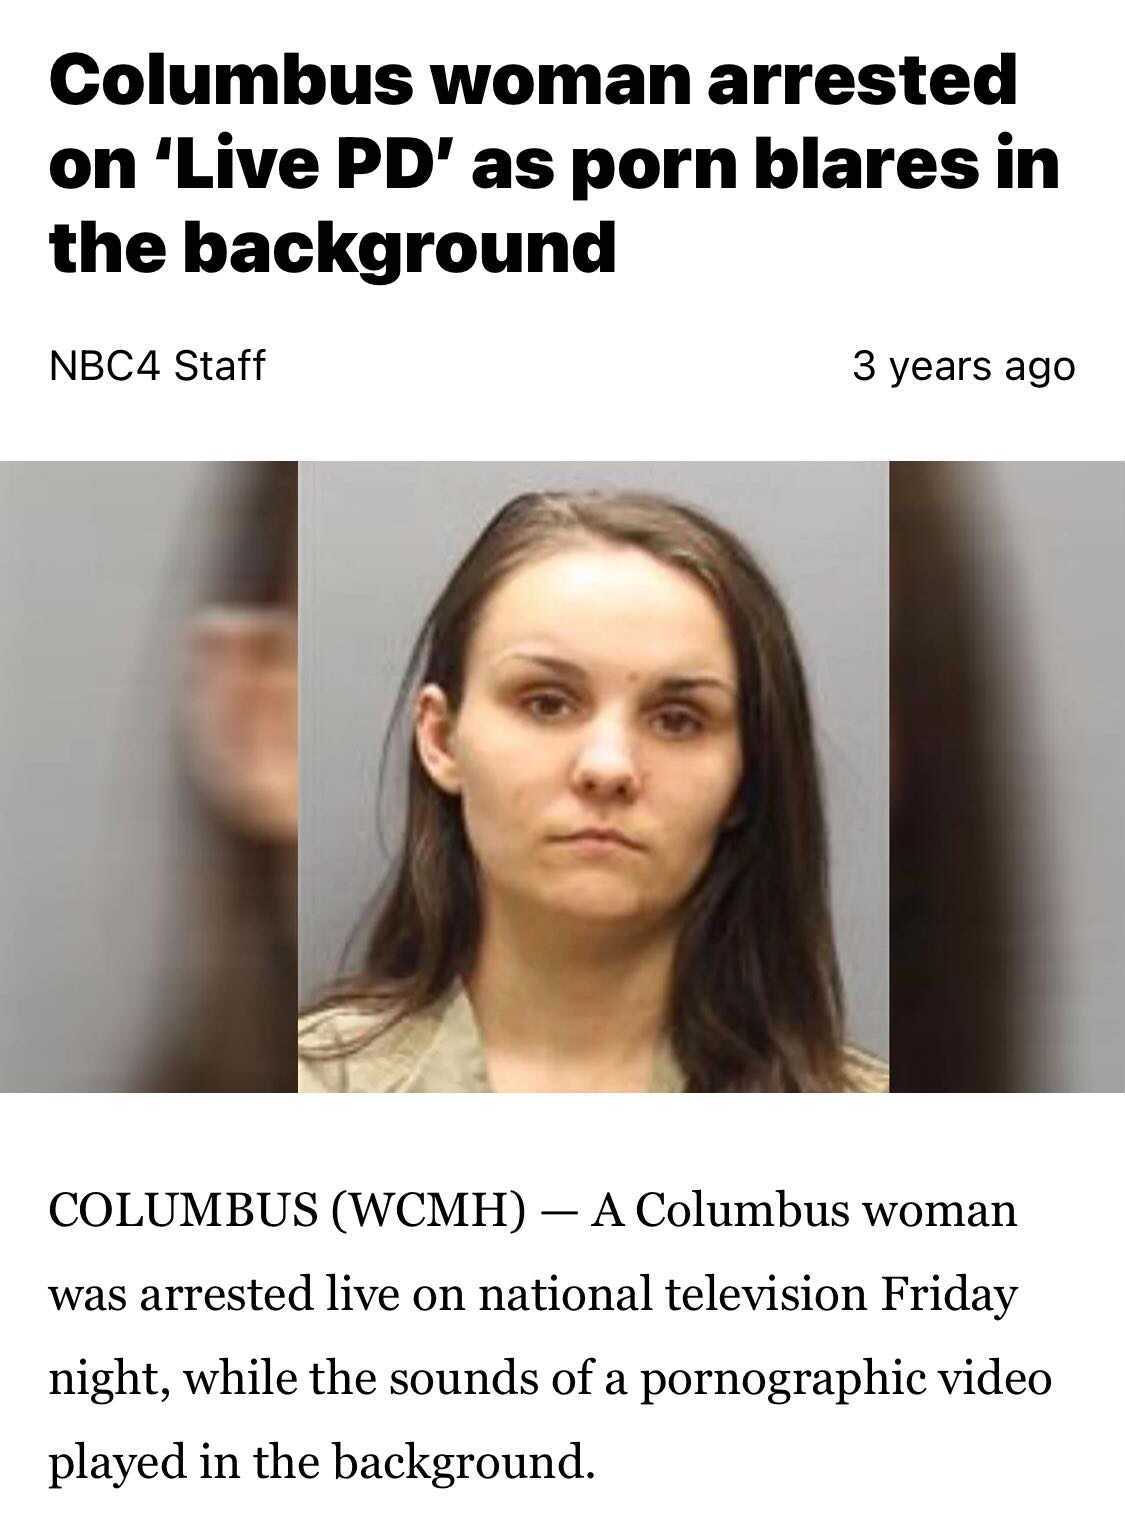 head - Columbus woman arrested on 'Live Pd' as porn blares in the background NBC4 Staff 3 years ago Columbus Wcmh A Columbus woman was arrested live on national television Friday night, while the sounds of a pornographic video played in the background.